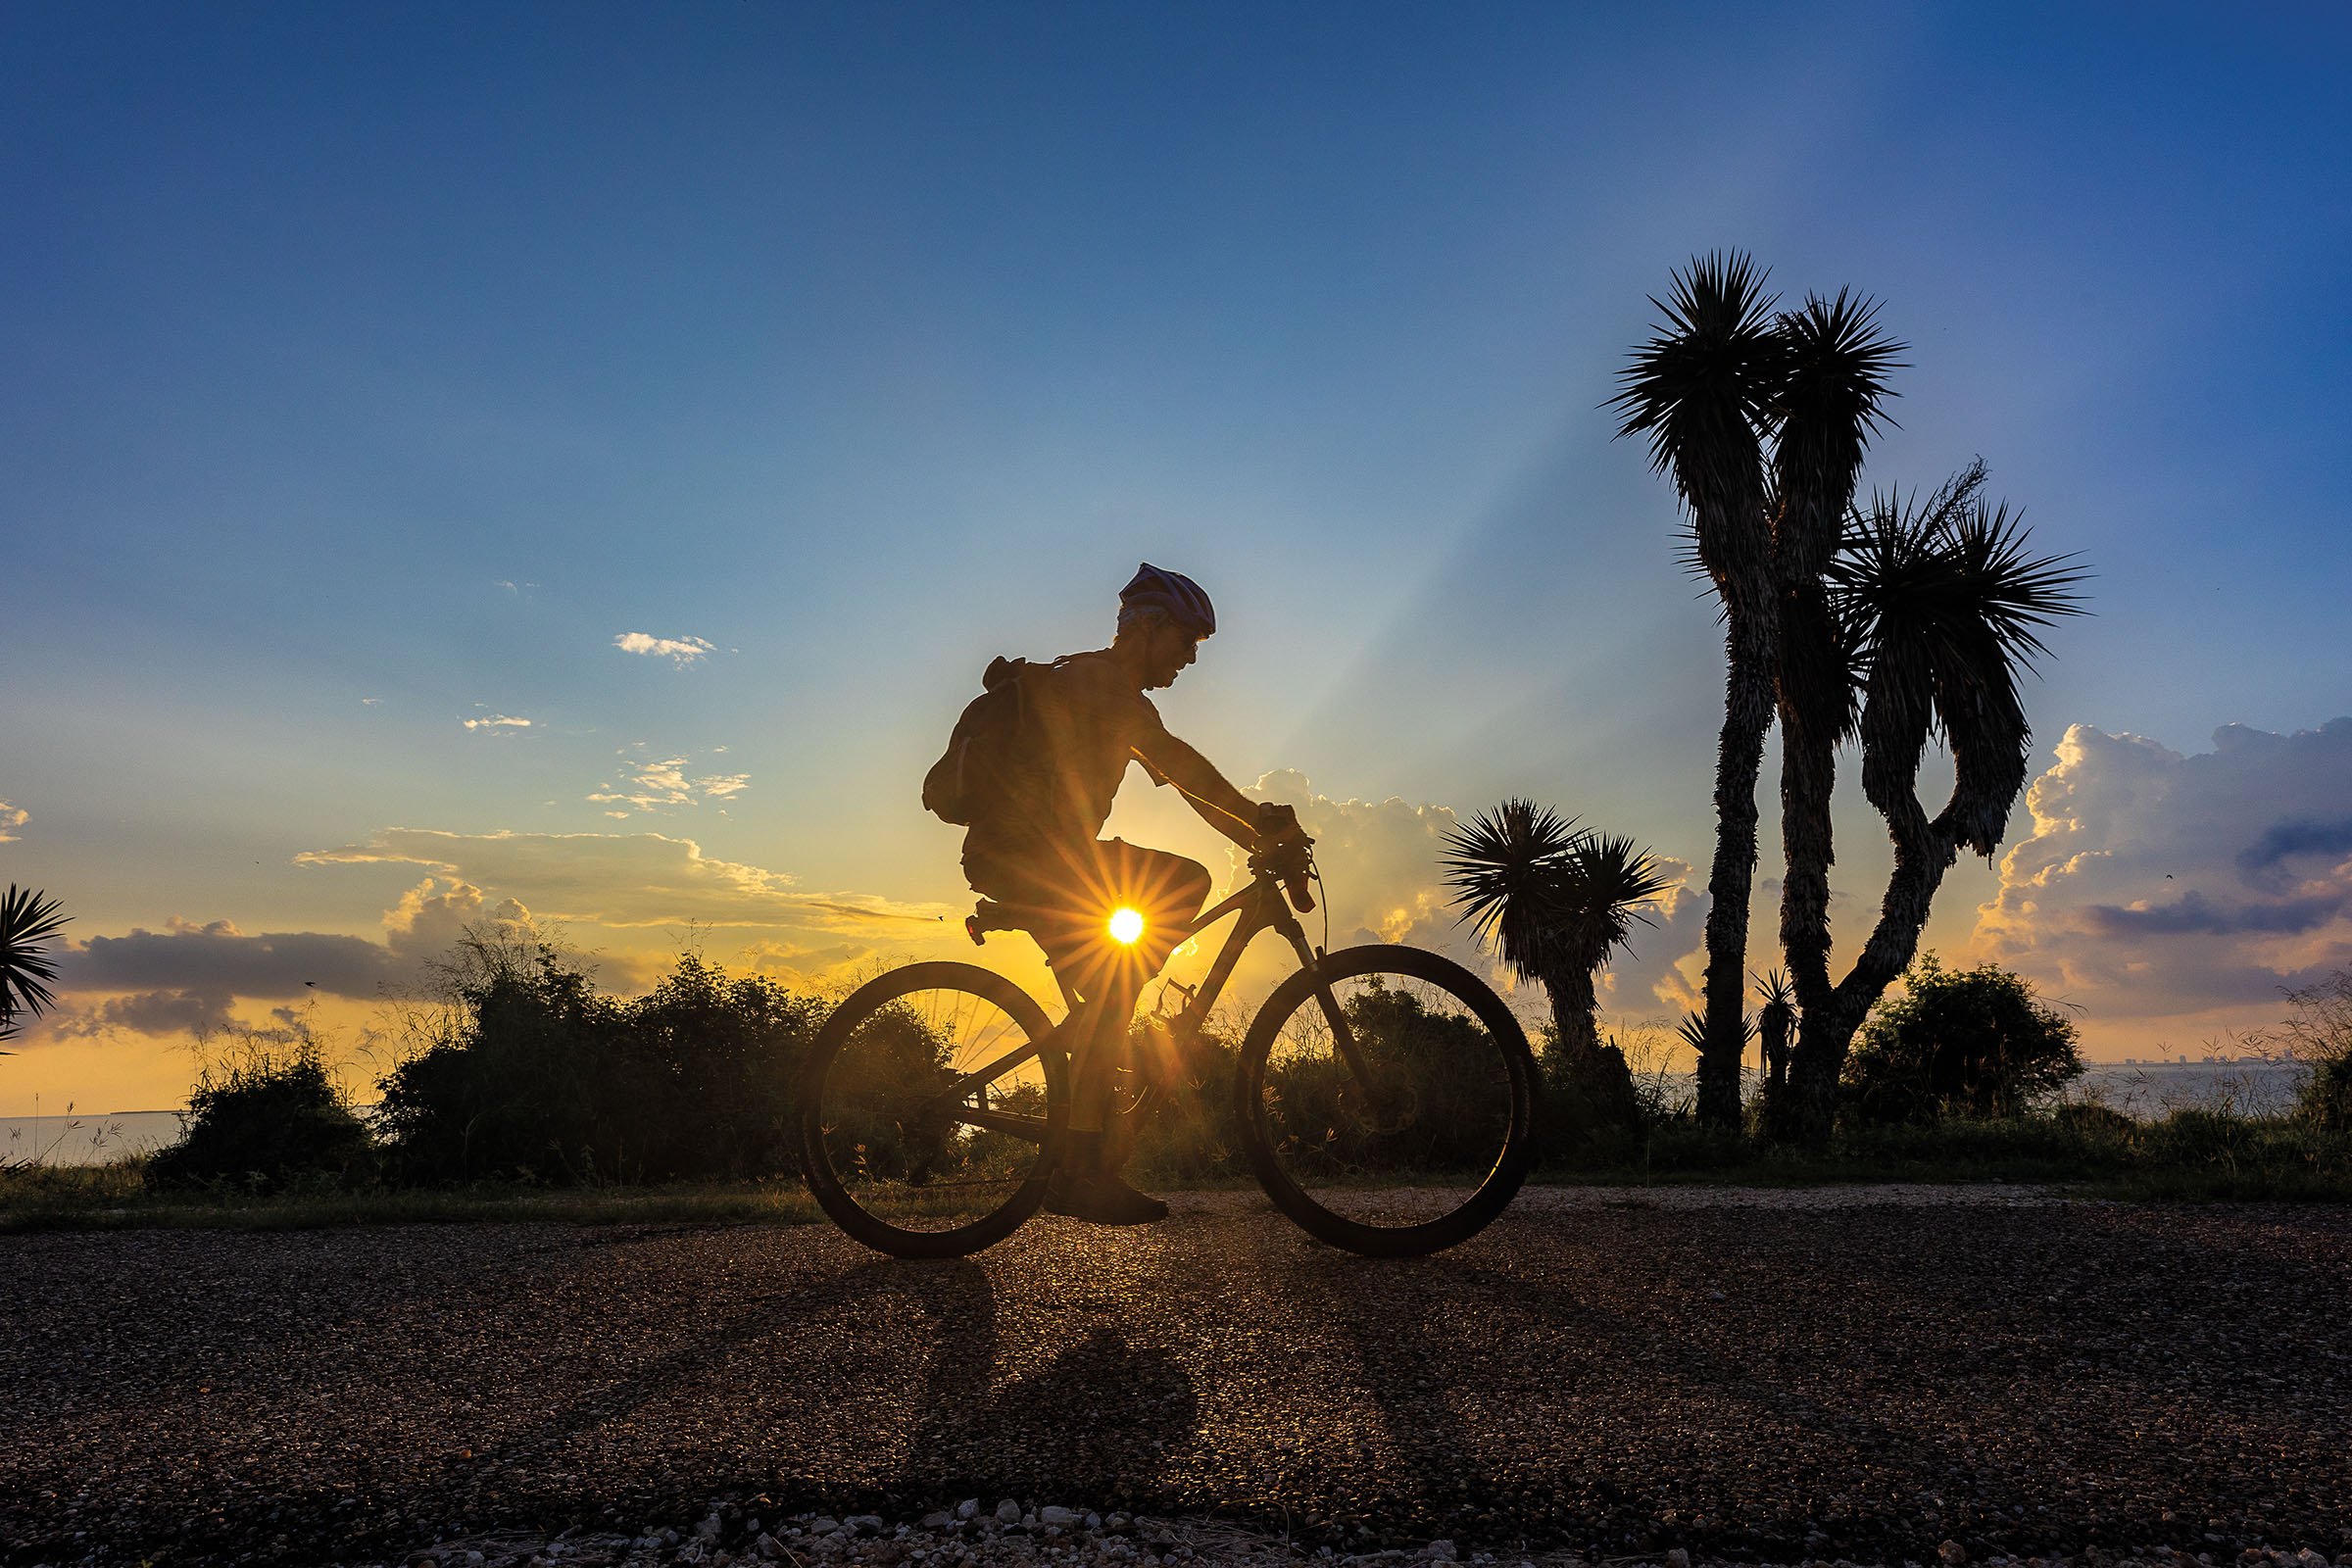 A silhouette of a person riding a bicycle in front of a sunset